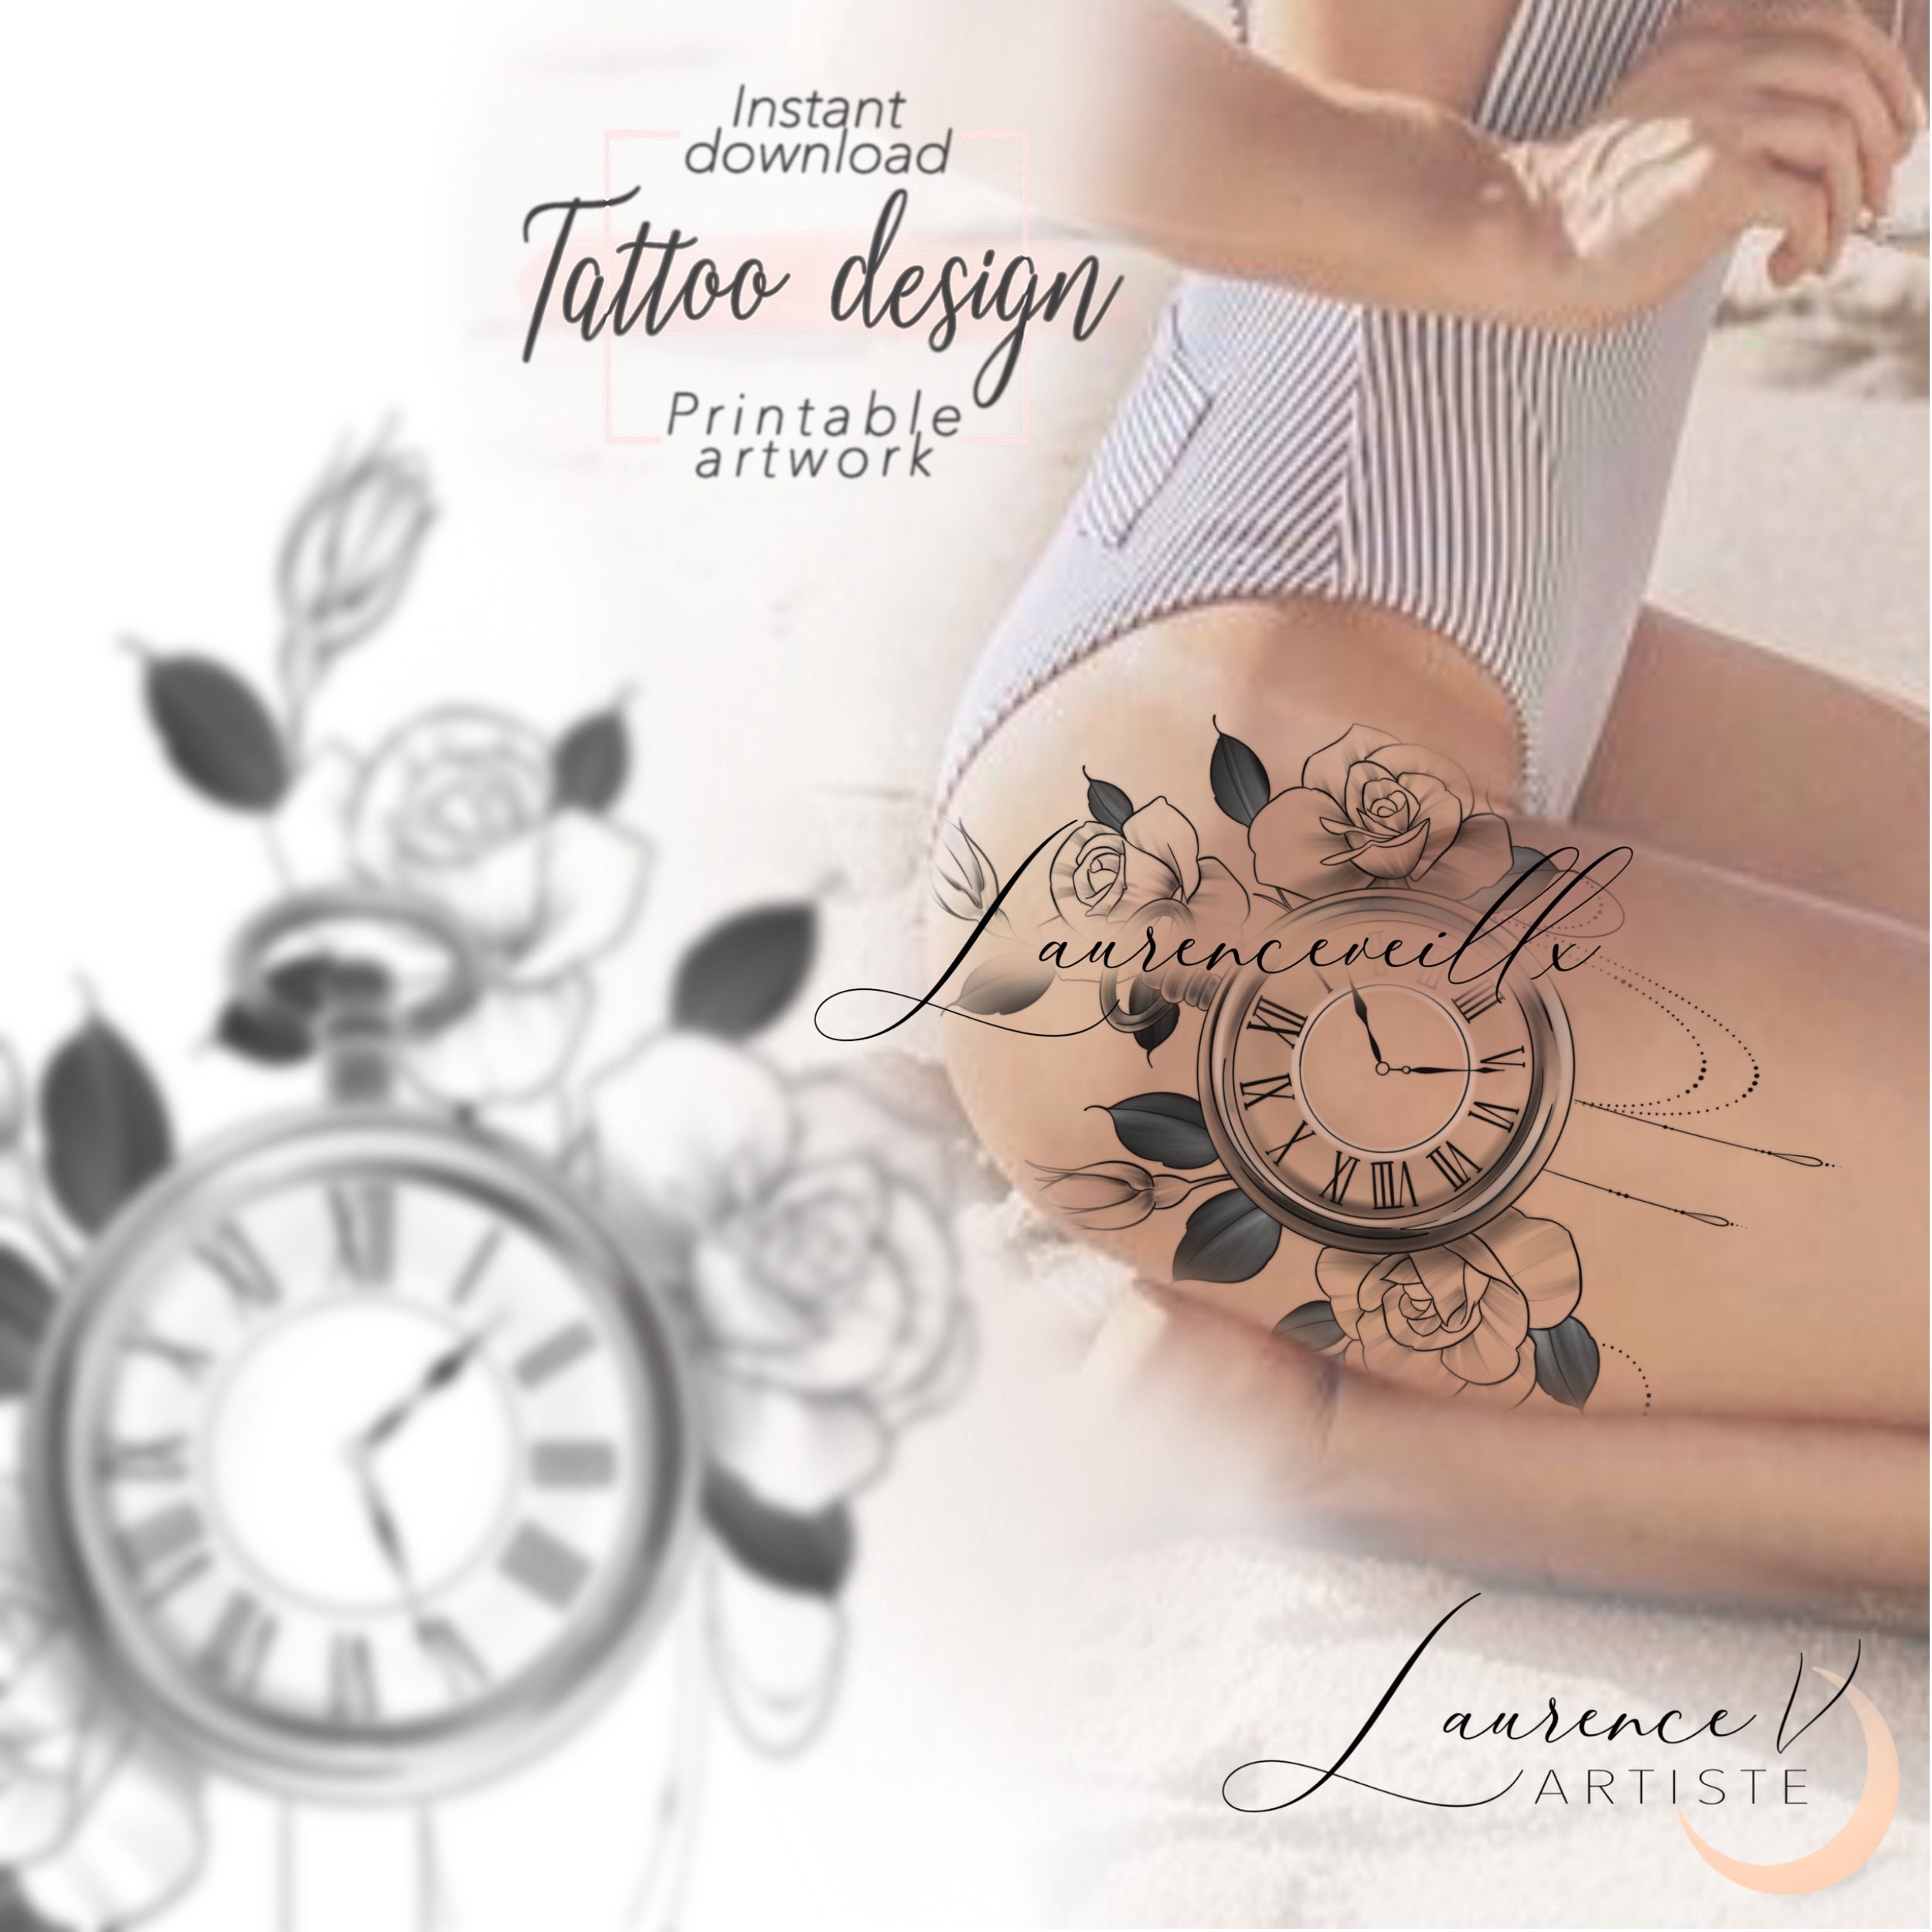 Instant Download Tattoo Design Clock And Roses Floral Etsy